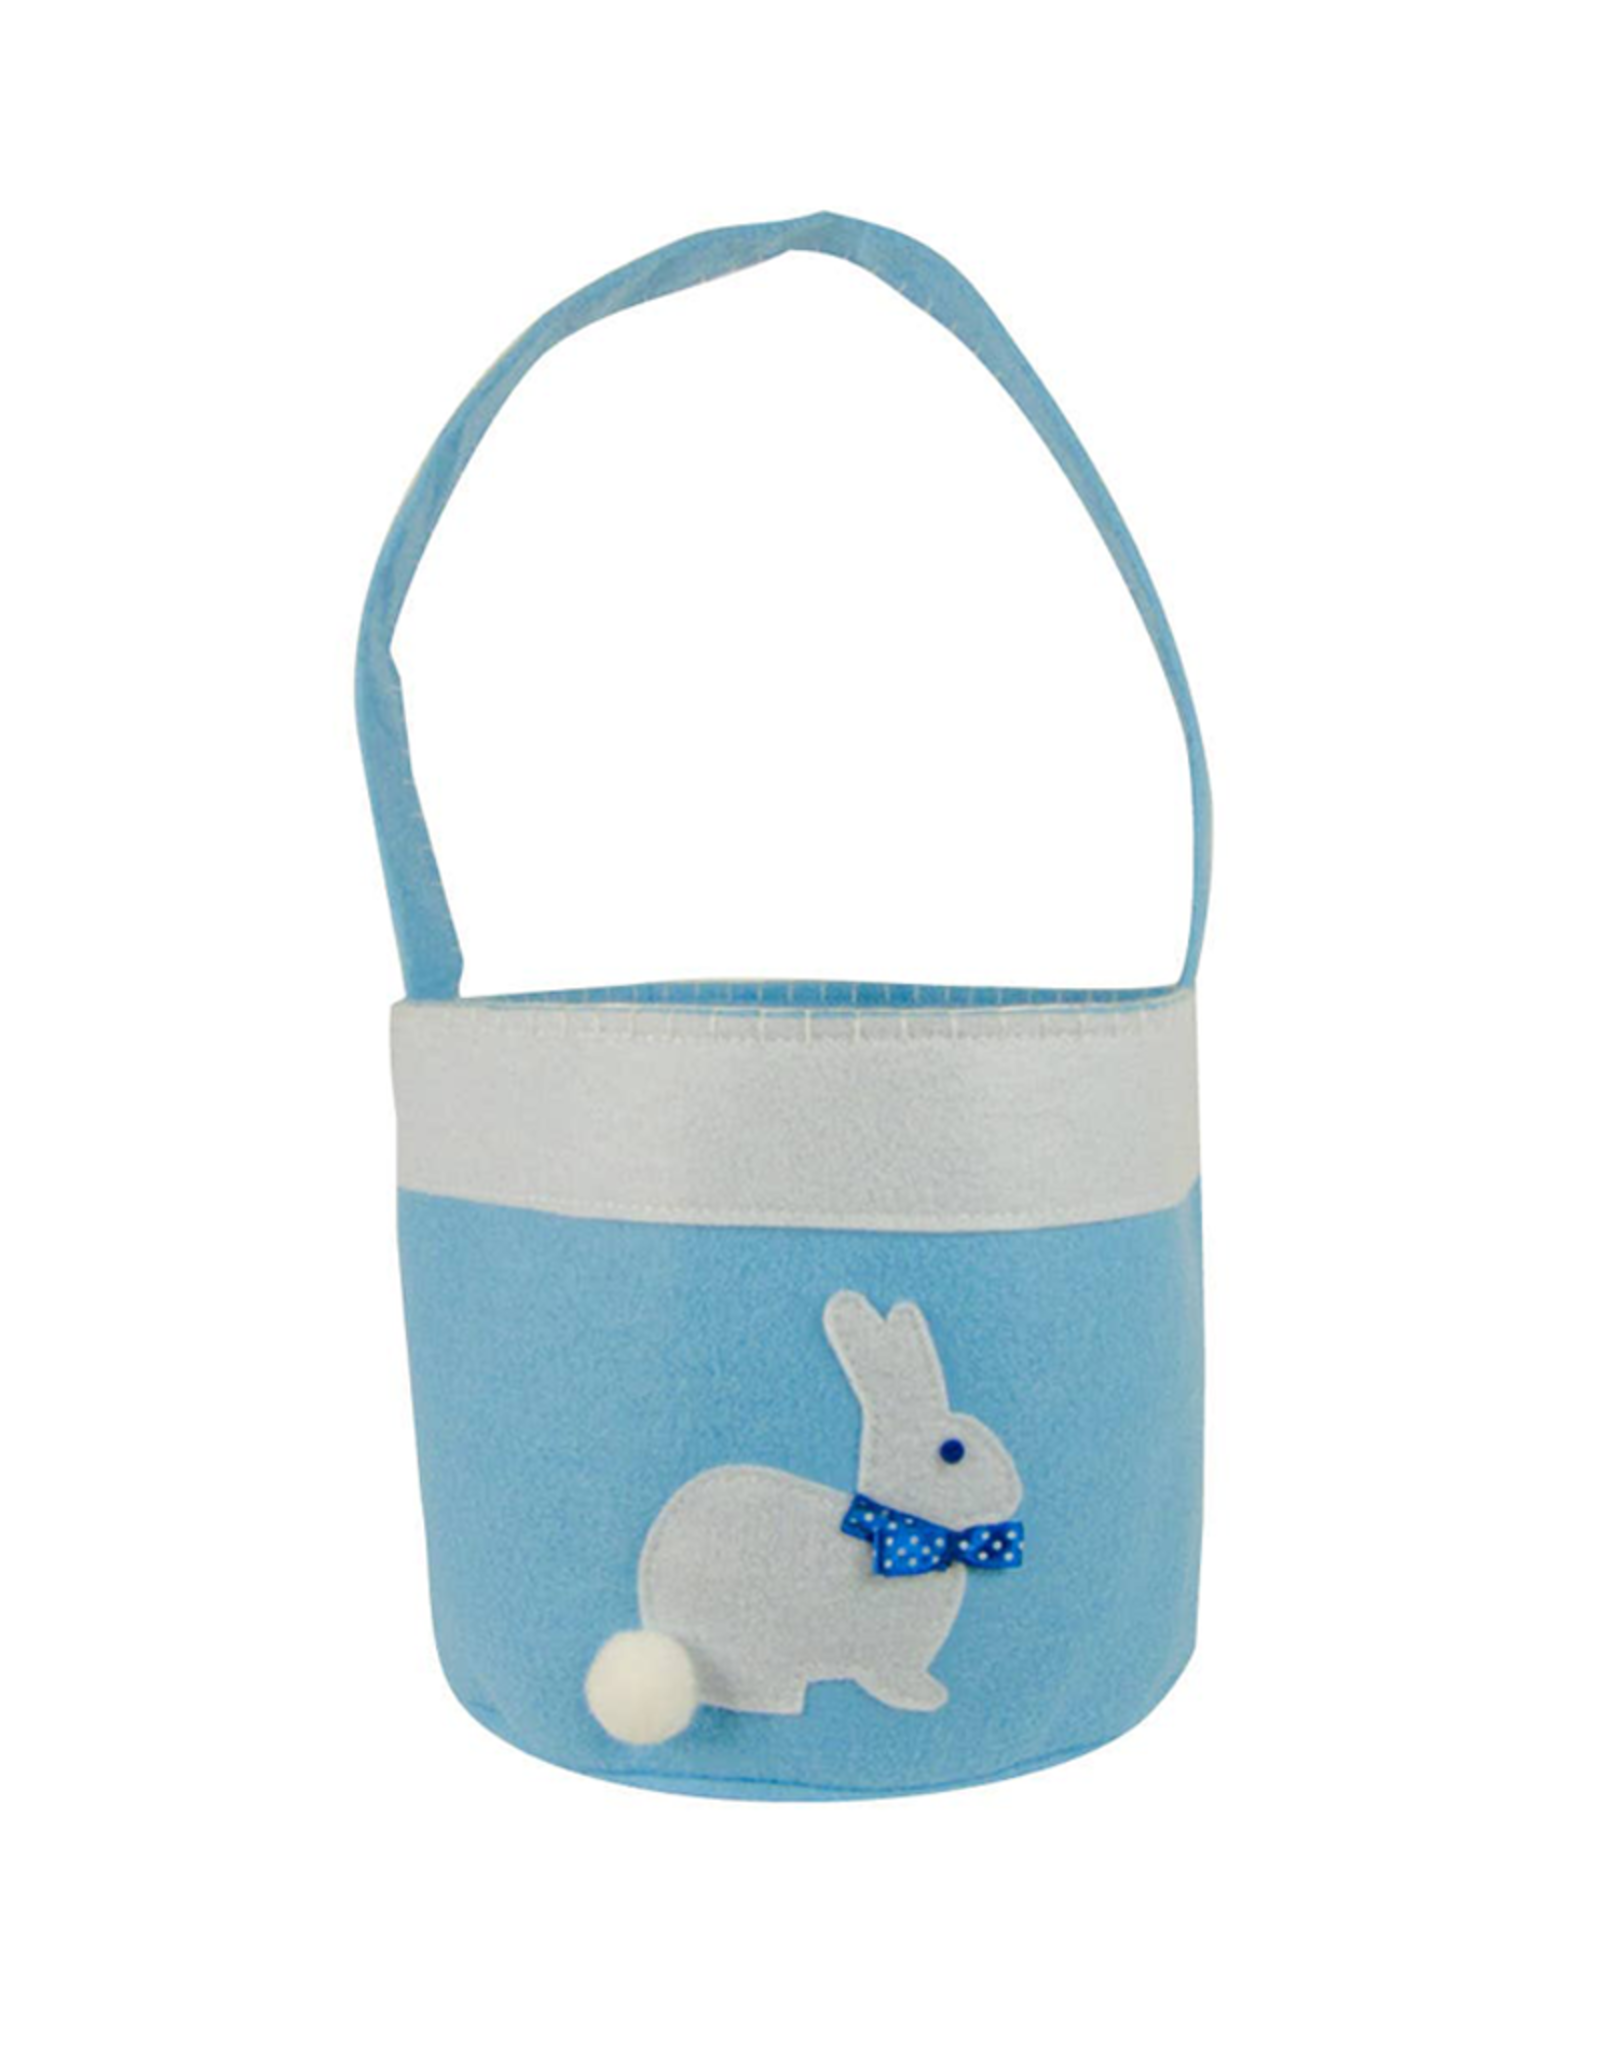 Groovy Holidays Bunny Basket w/embroidery peter blue